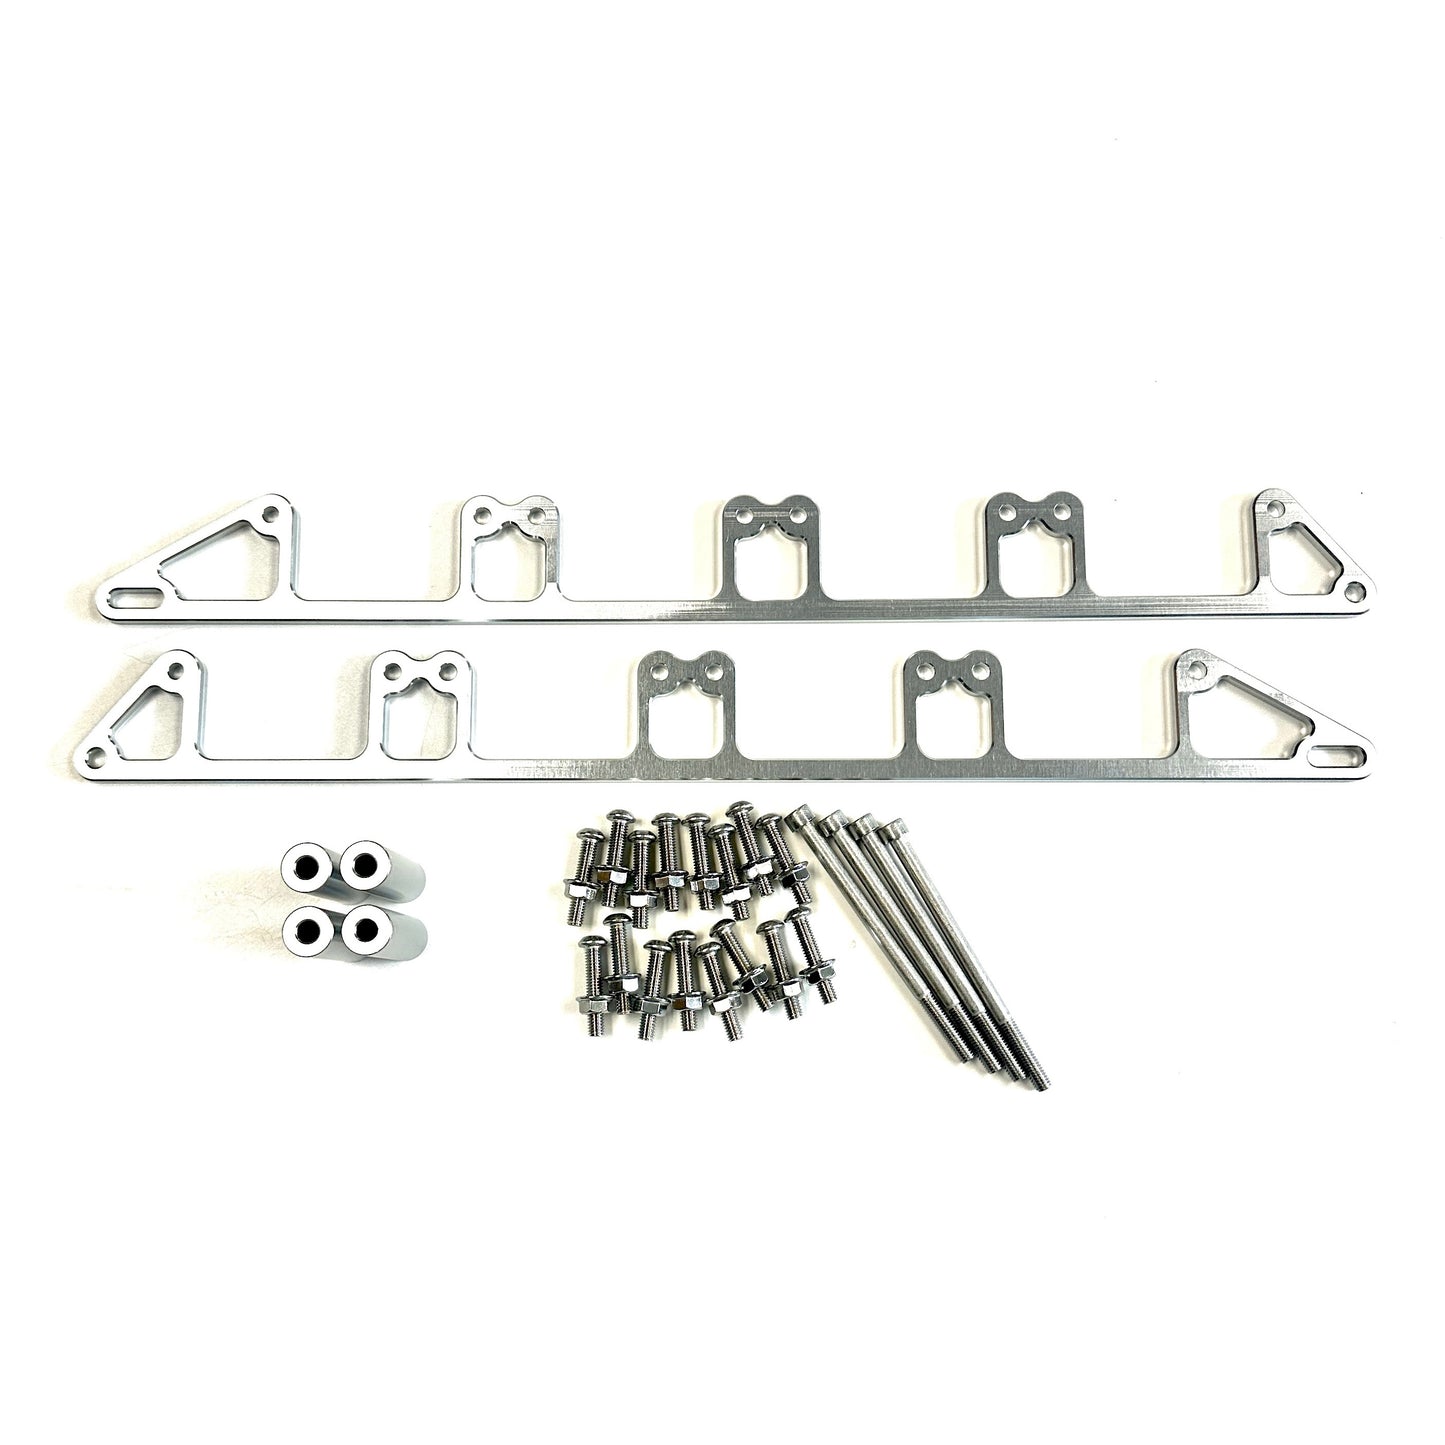 2018-20 Coyote Smart Coil Mounting Kit